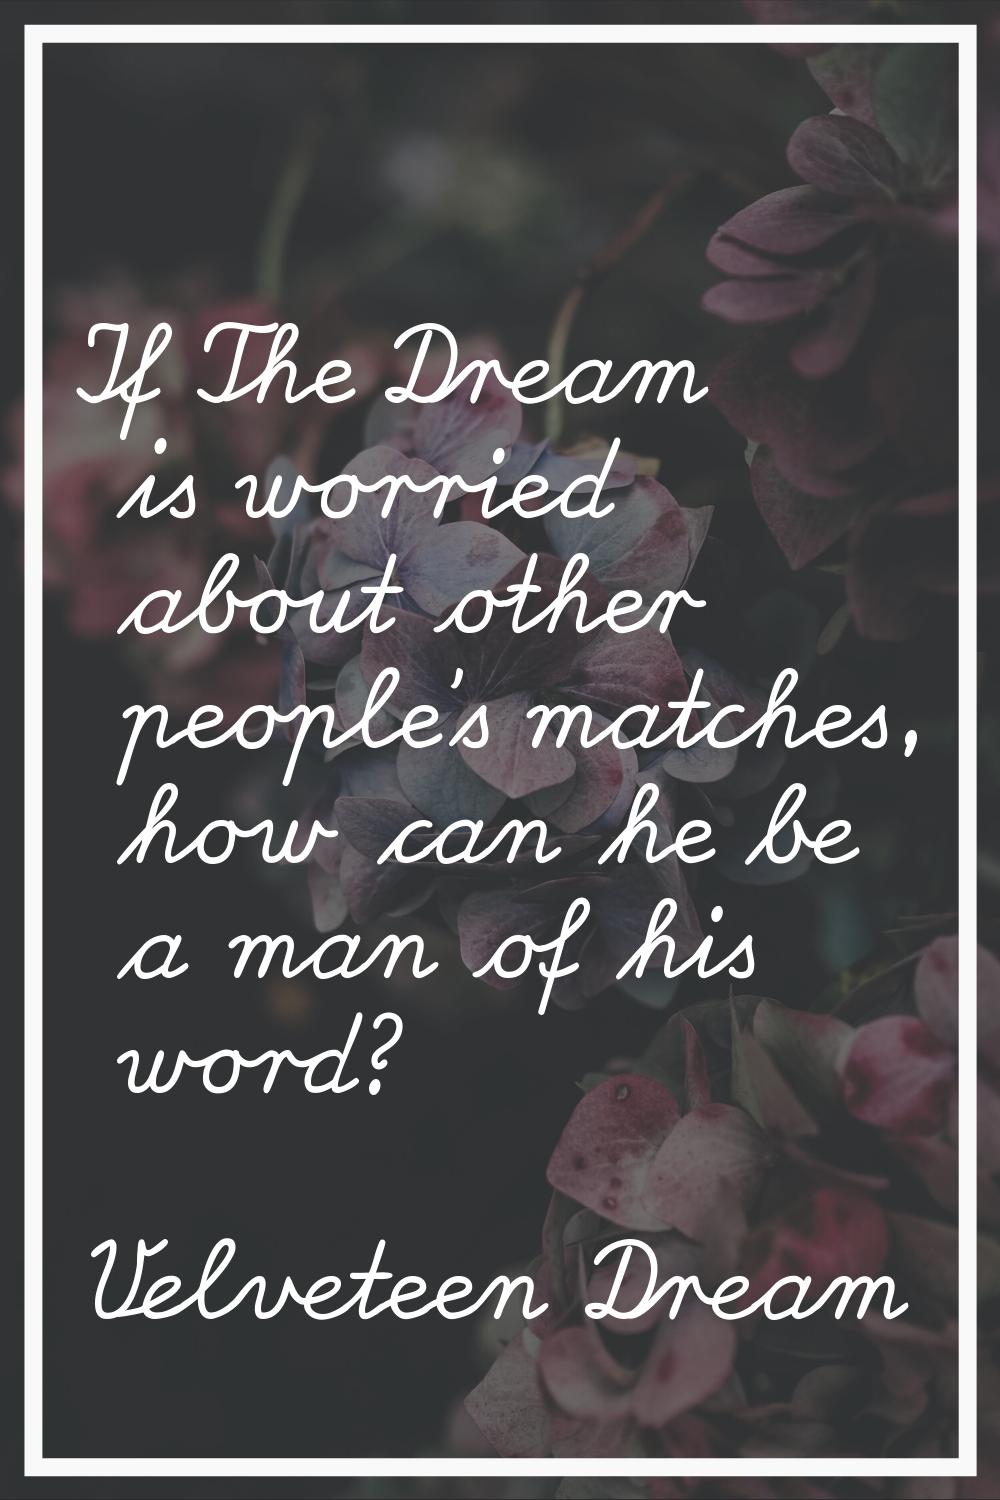 If The Dream is worried about other people's matches, how can he be a man of his word?